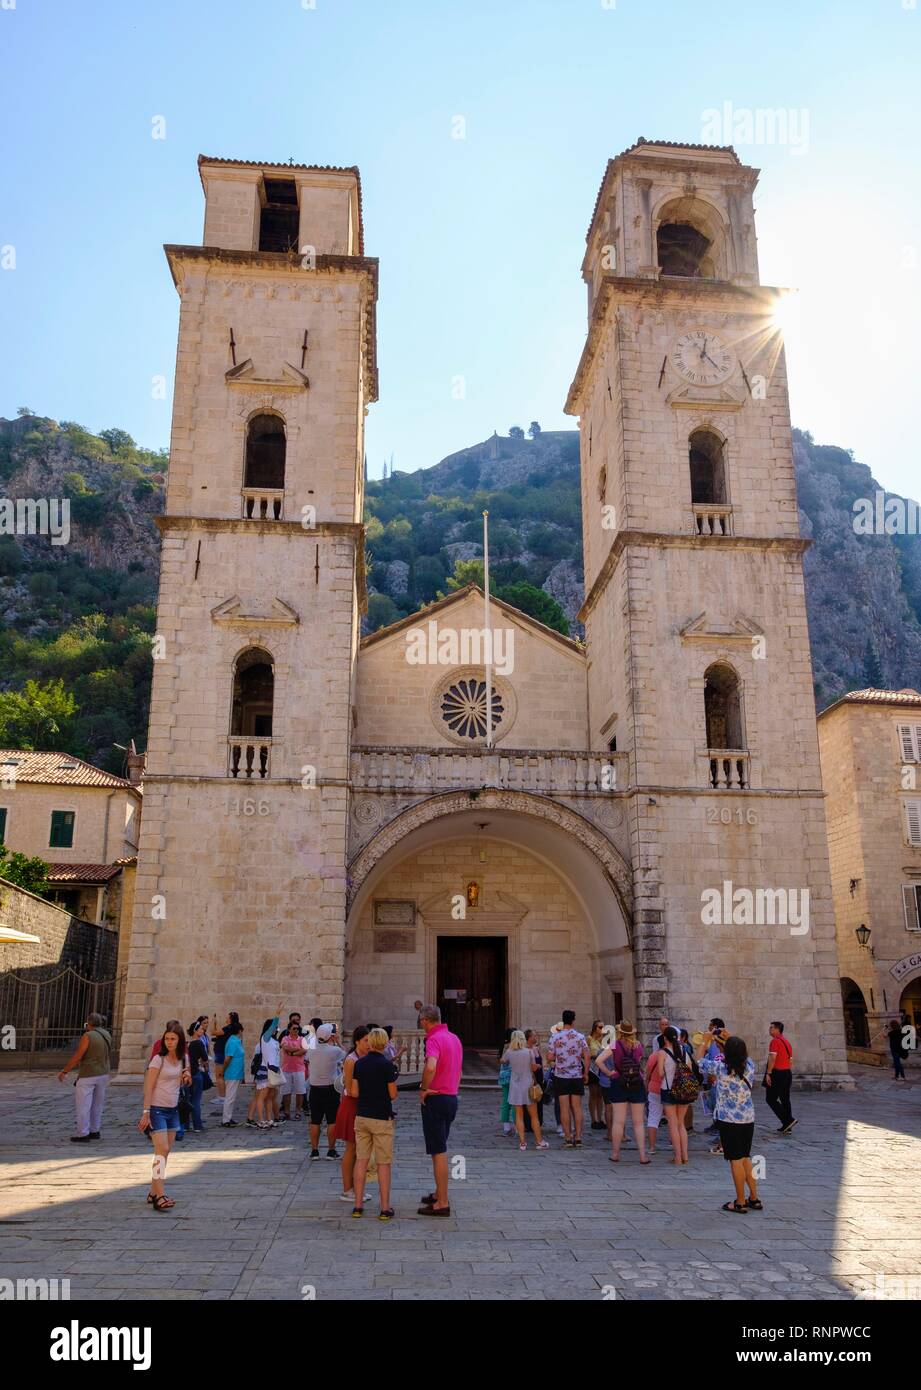 Tourist group in front of Sankt Tryphon Cathedral, Old Town Kotor, Montenegro Stock Photo